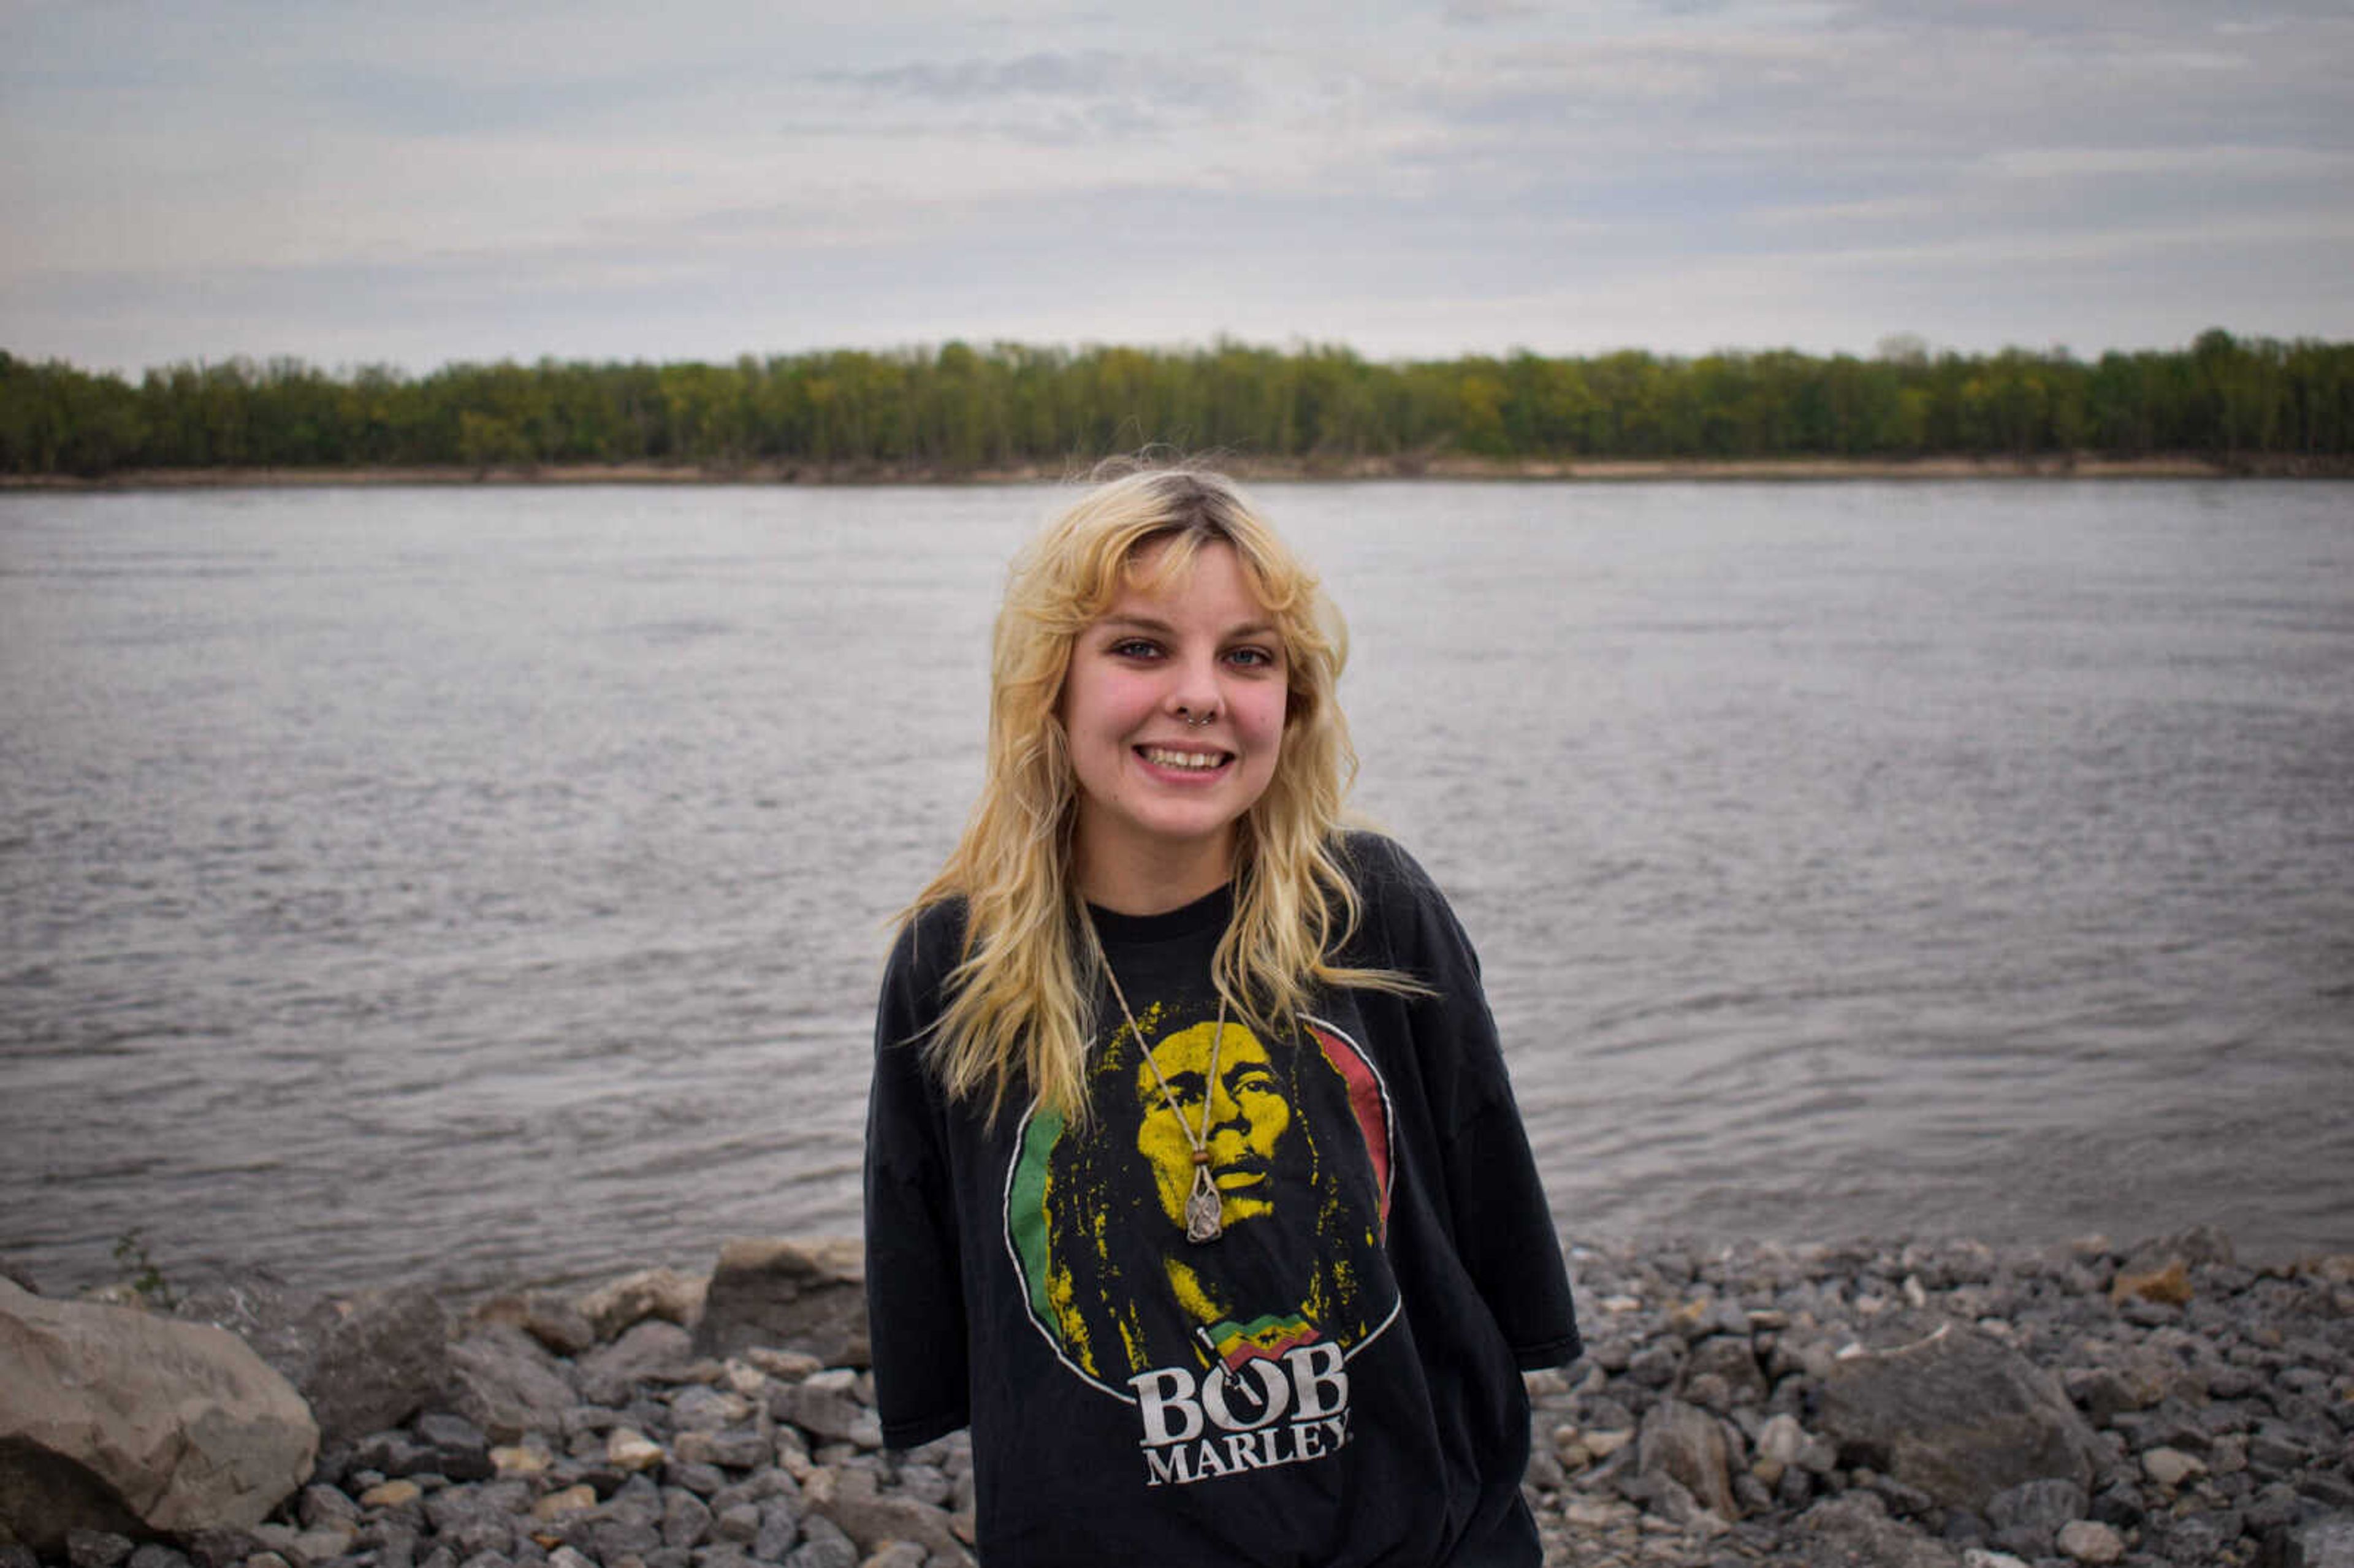 Morgan Proffer, the founder of the Cape Cleanup organization, poses for a photo in front of the Mississippi River.